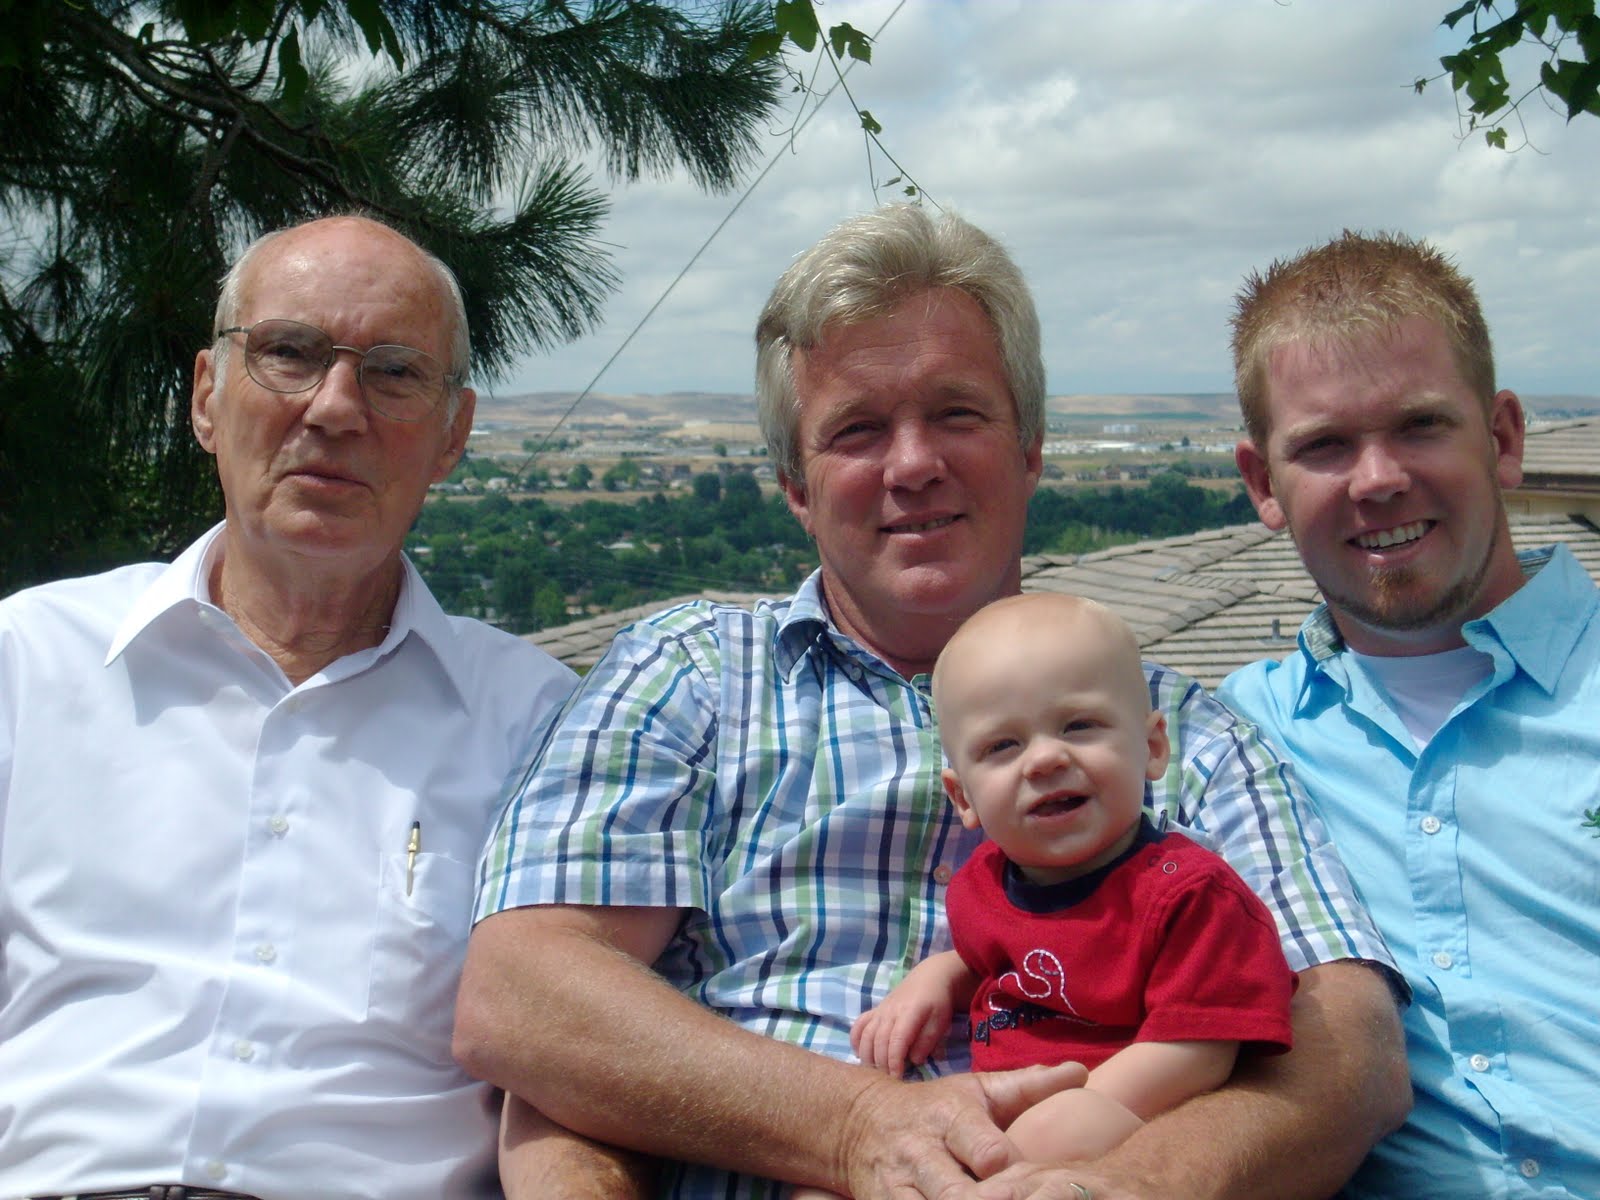 There's an image showing four people smiling: A baby, an old man, a middle-aged man, and a young man